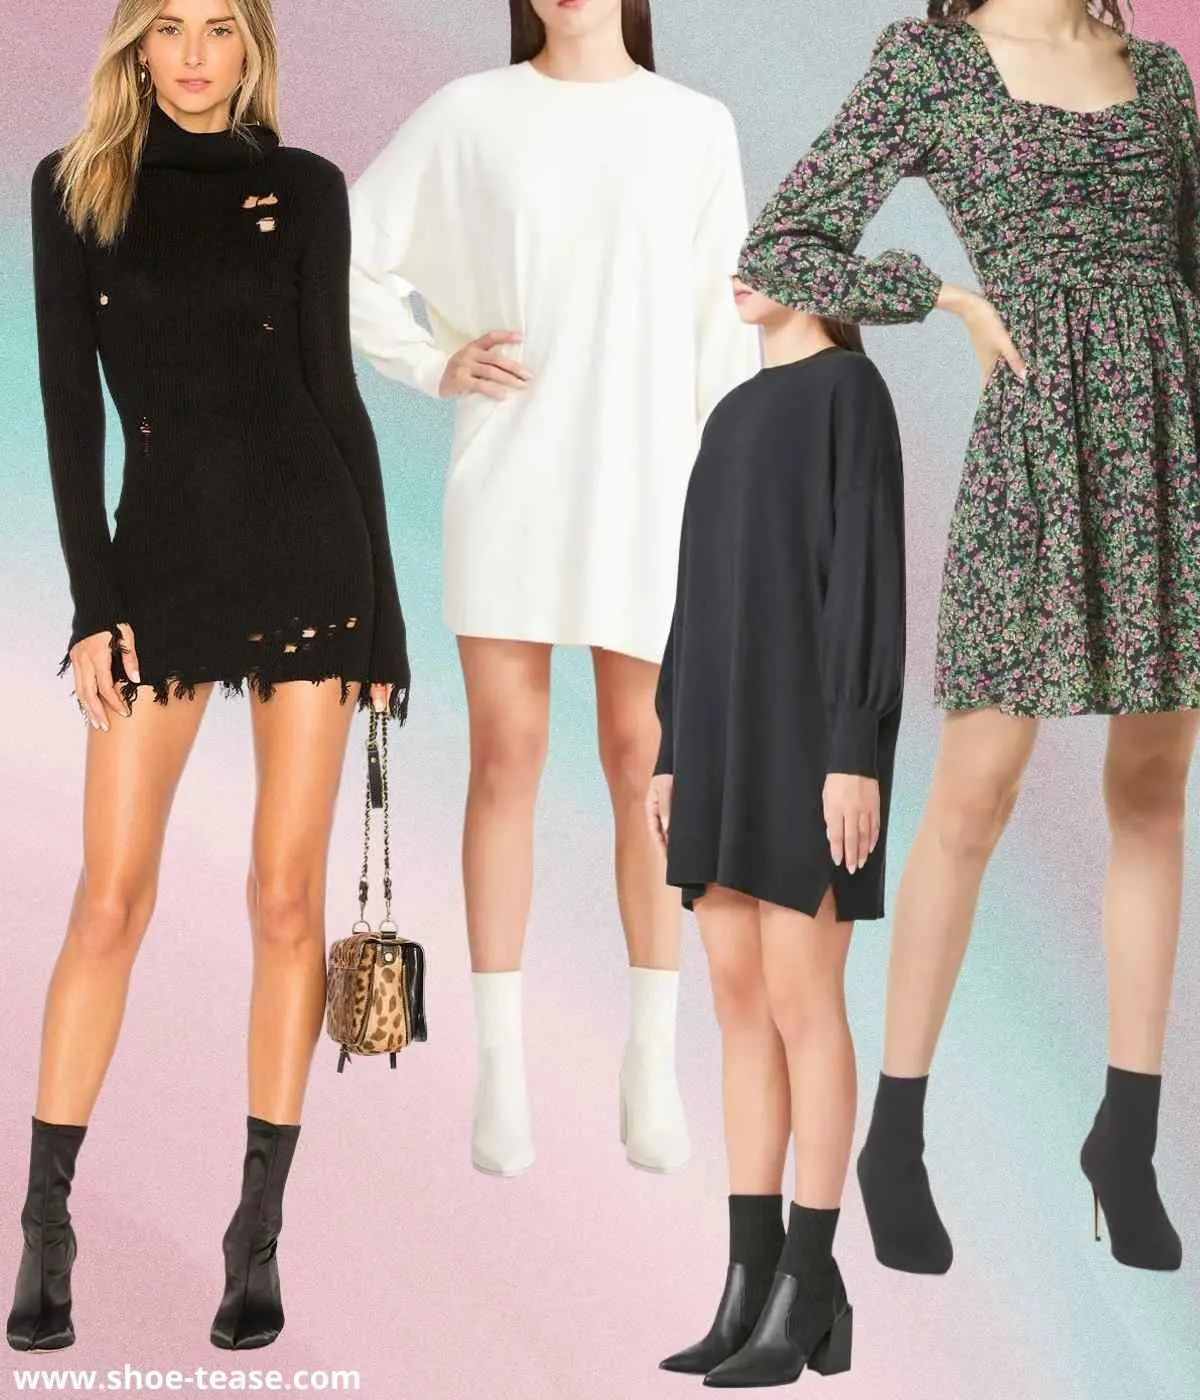 4 women wearing different mini dresses with socks boots.